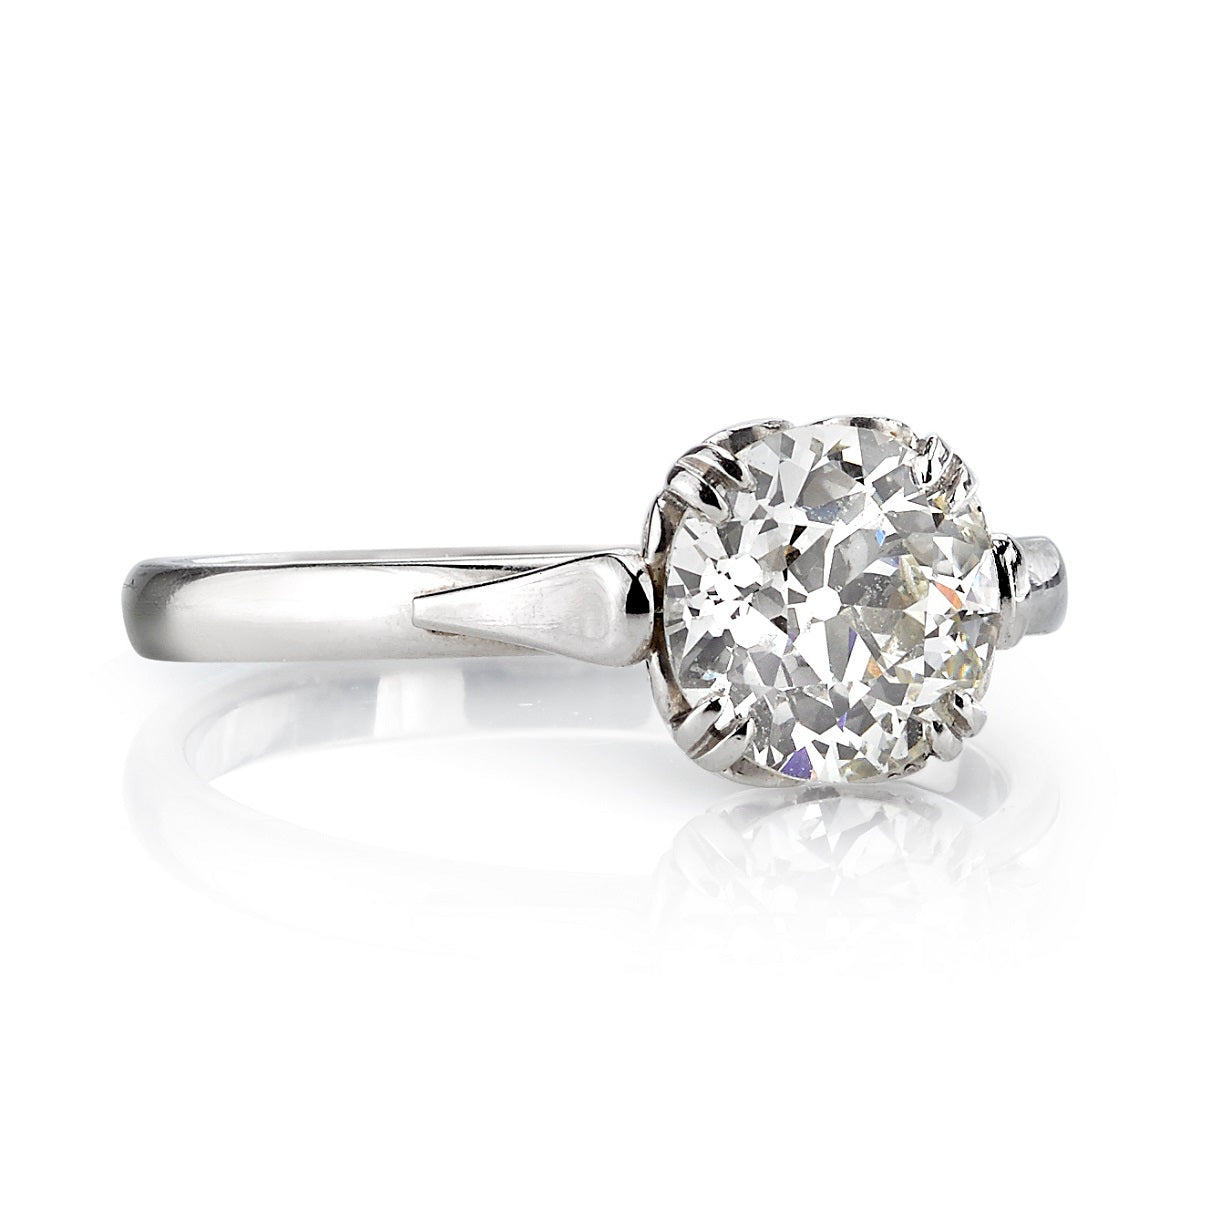 SINGLE STONE SYDNEE RING featuring 1.51ct J/VS1 EGL certified old European cut diamond set in a handcrafted platinum mounting.